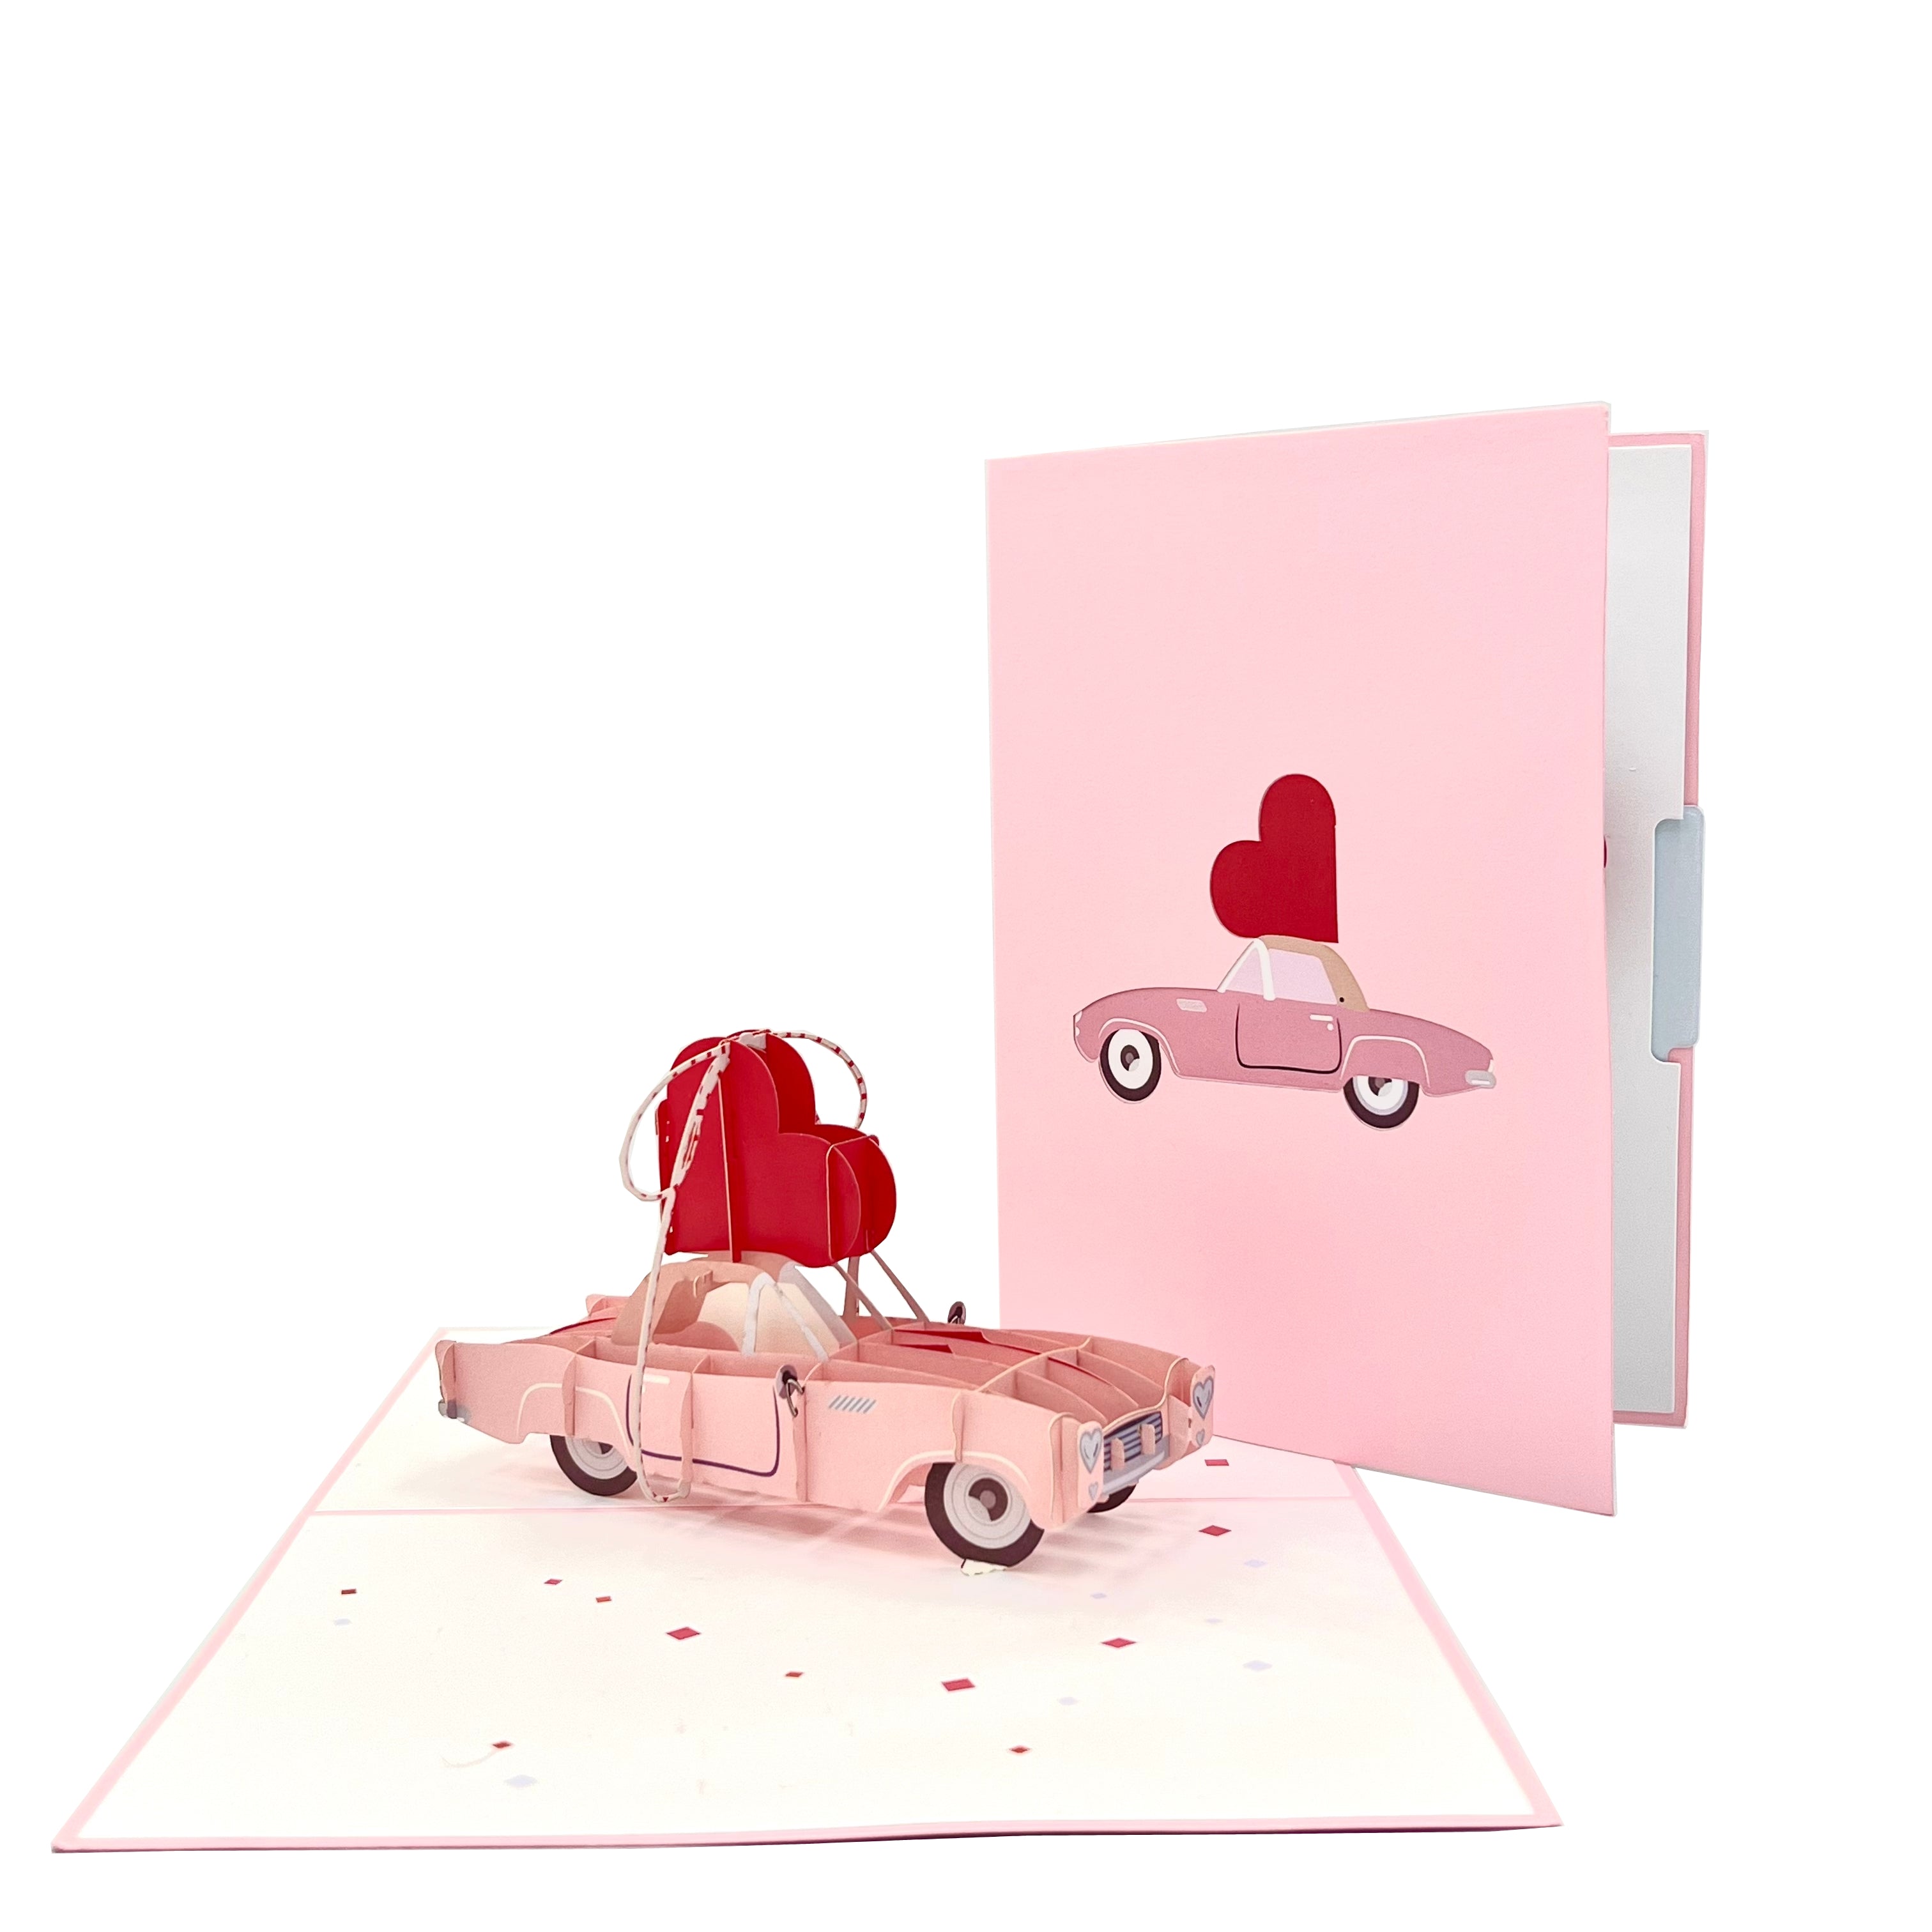 Pop Up Greeting Card Honey Moon Love Vintage Vehicle Wedding Gift Invitation Card Congratulation Card Engagement Elopement Proposal Gift